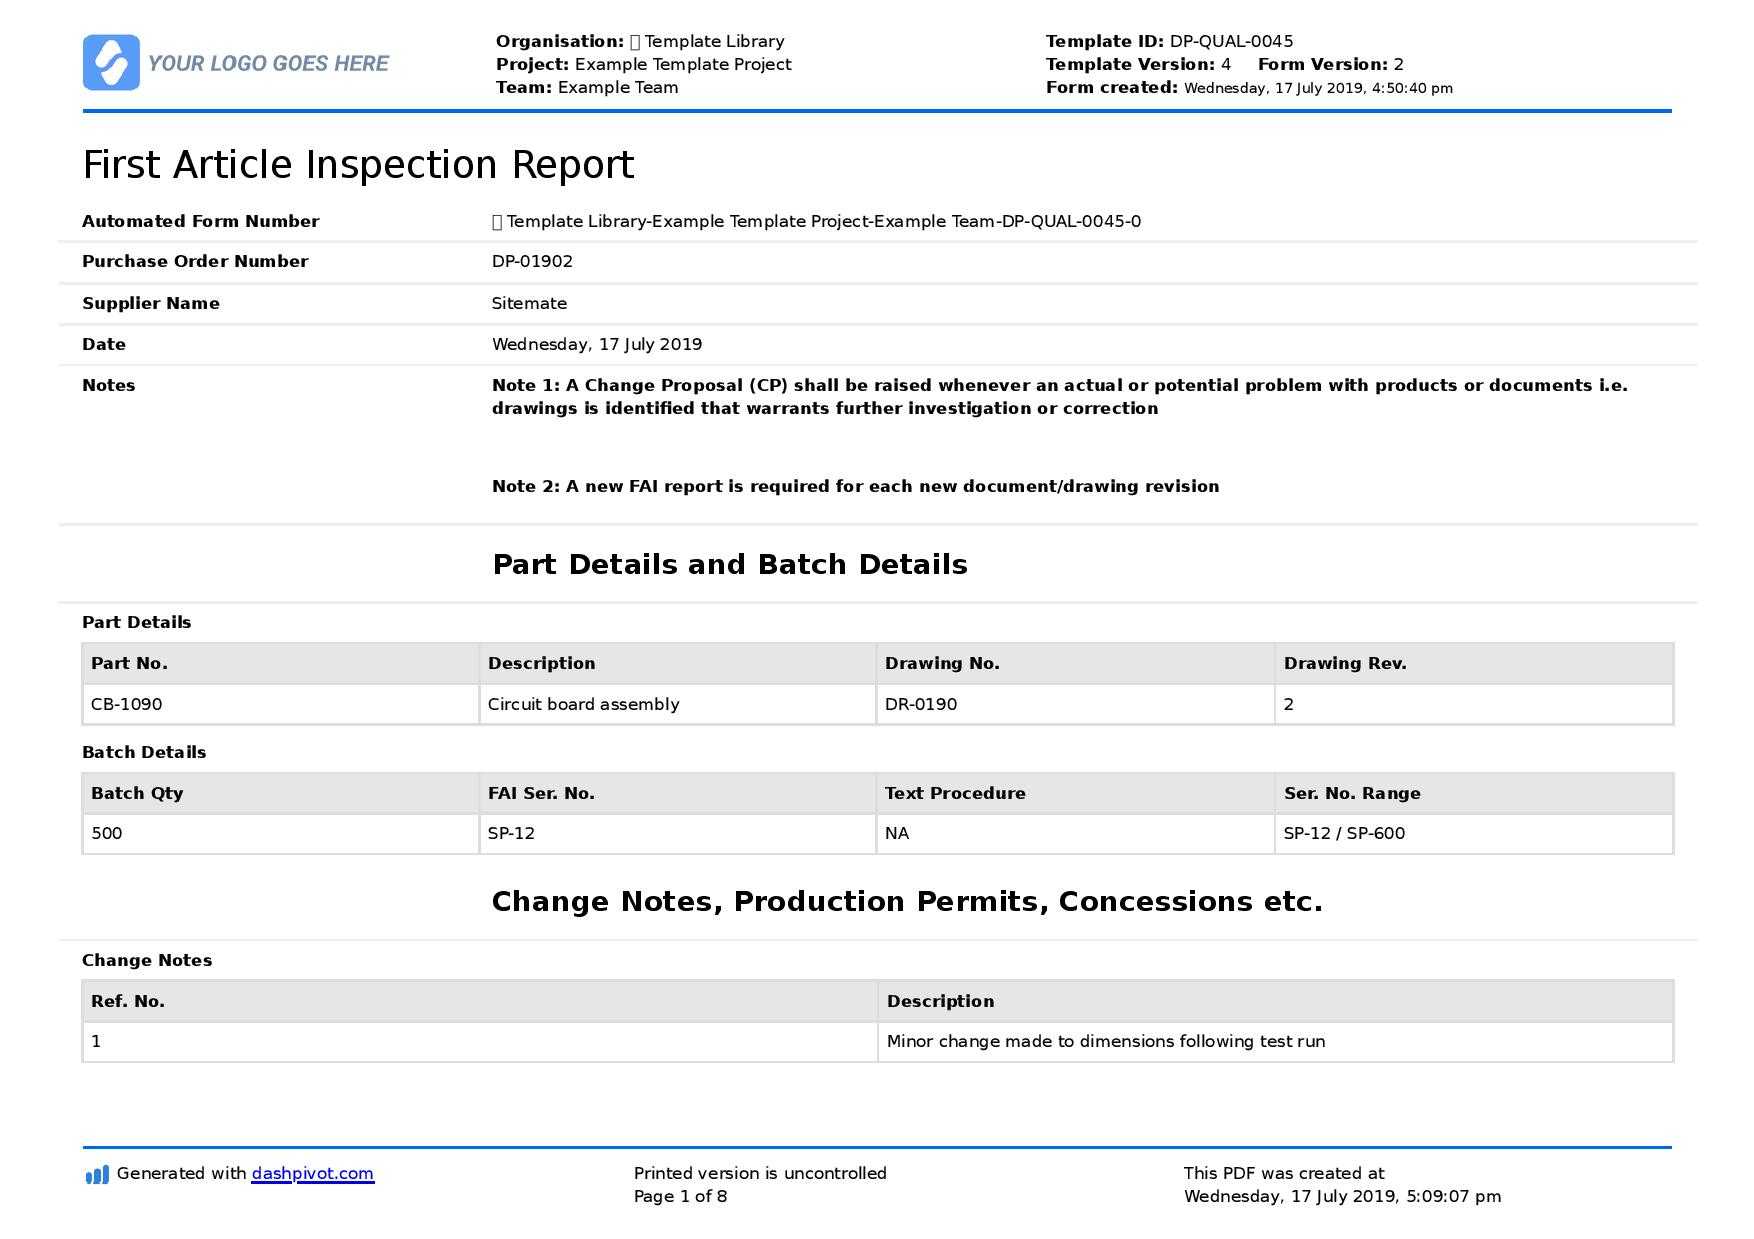 First Article Inspection Form Template: Free & Editable Inside Engineering Inspection Report Template